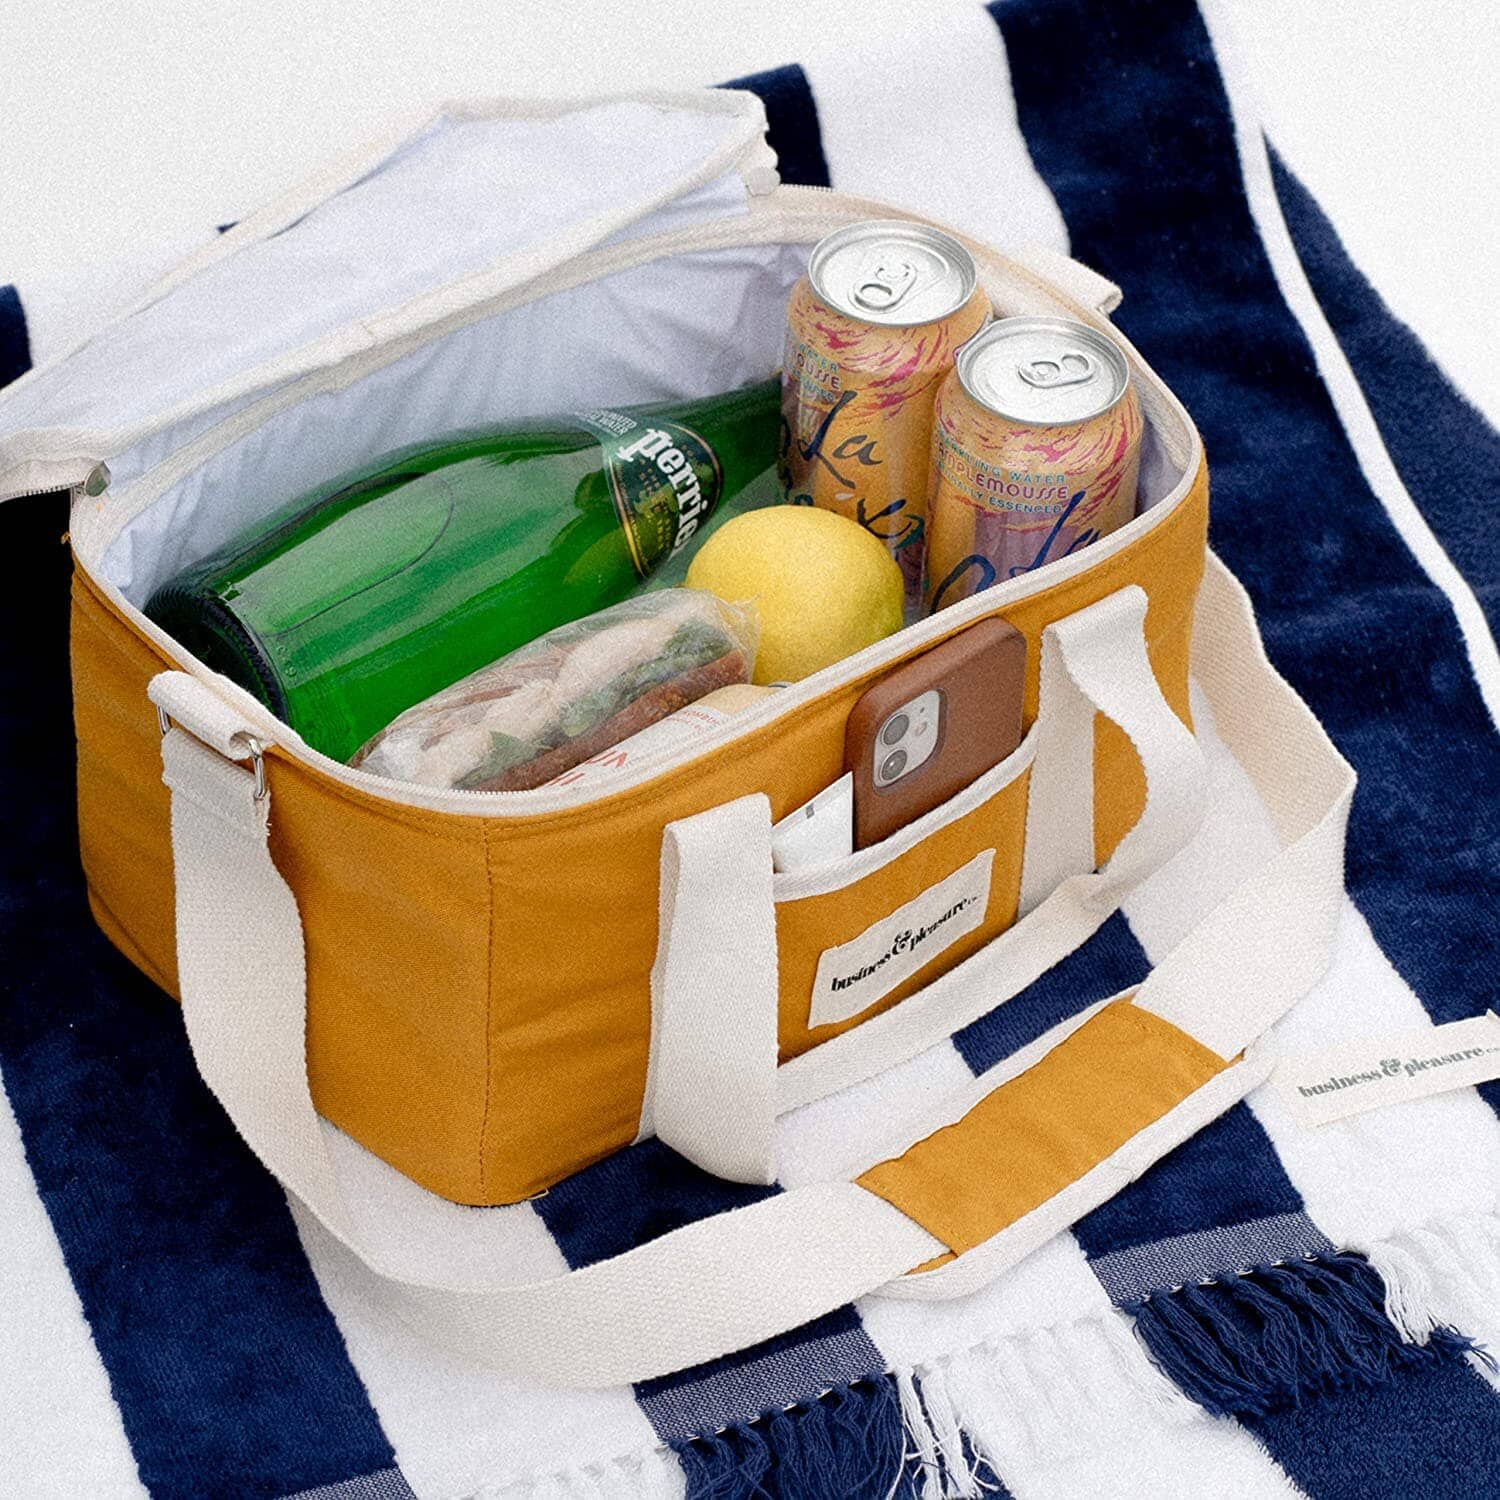 gold cooler bag filled with snacks and drinks